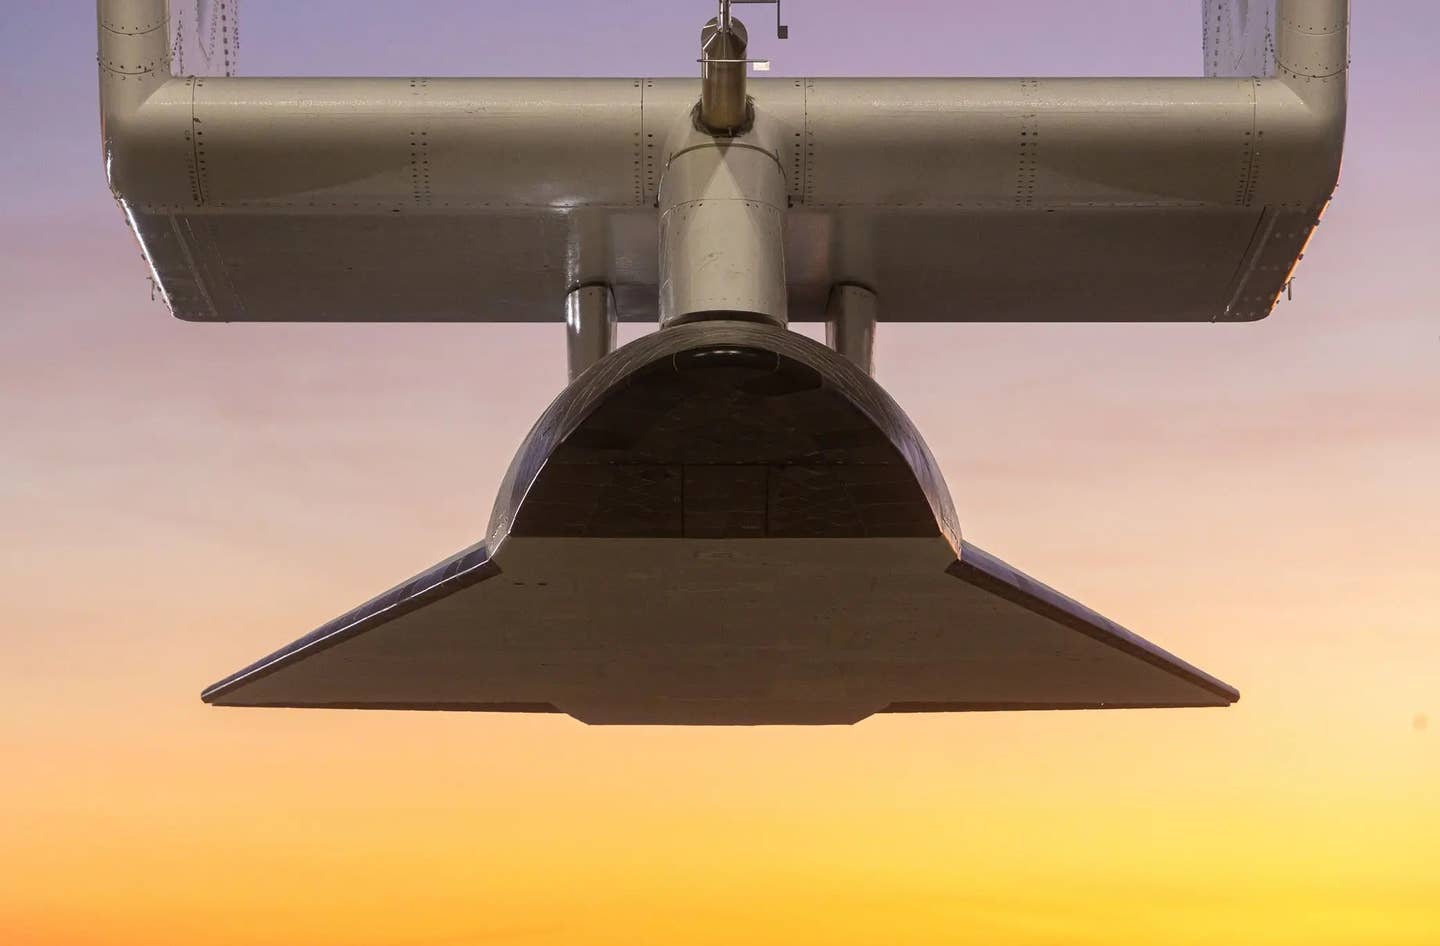 A head-on view of the Talon-A hypersonic vehicle.&nbsp;<em>Stratolaunch</em>